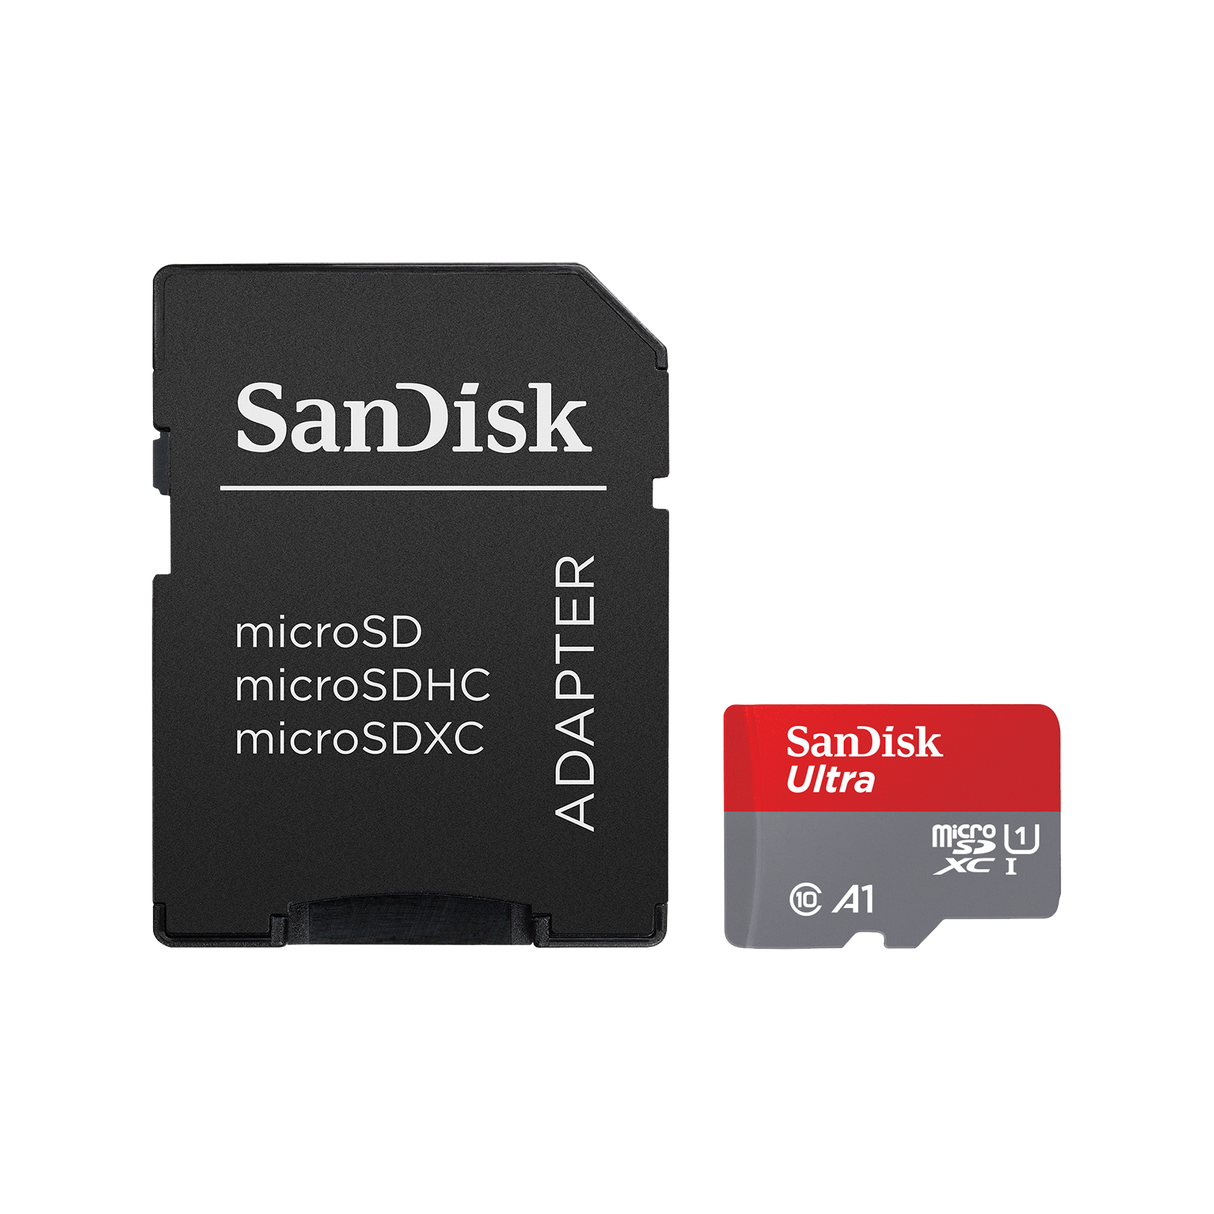 SanDisk Ultra microSDXC 512GB + SD Adapter 150MB/s  A1 Class 10 UHS-I